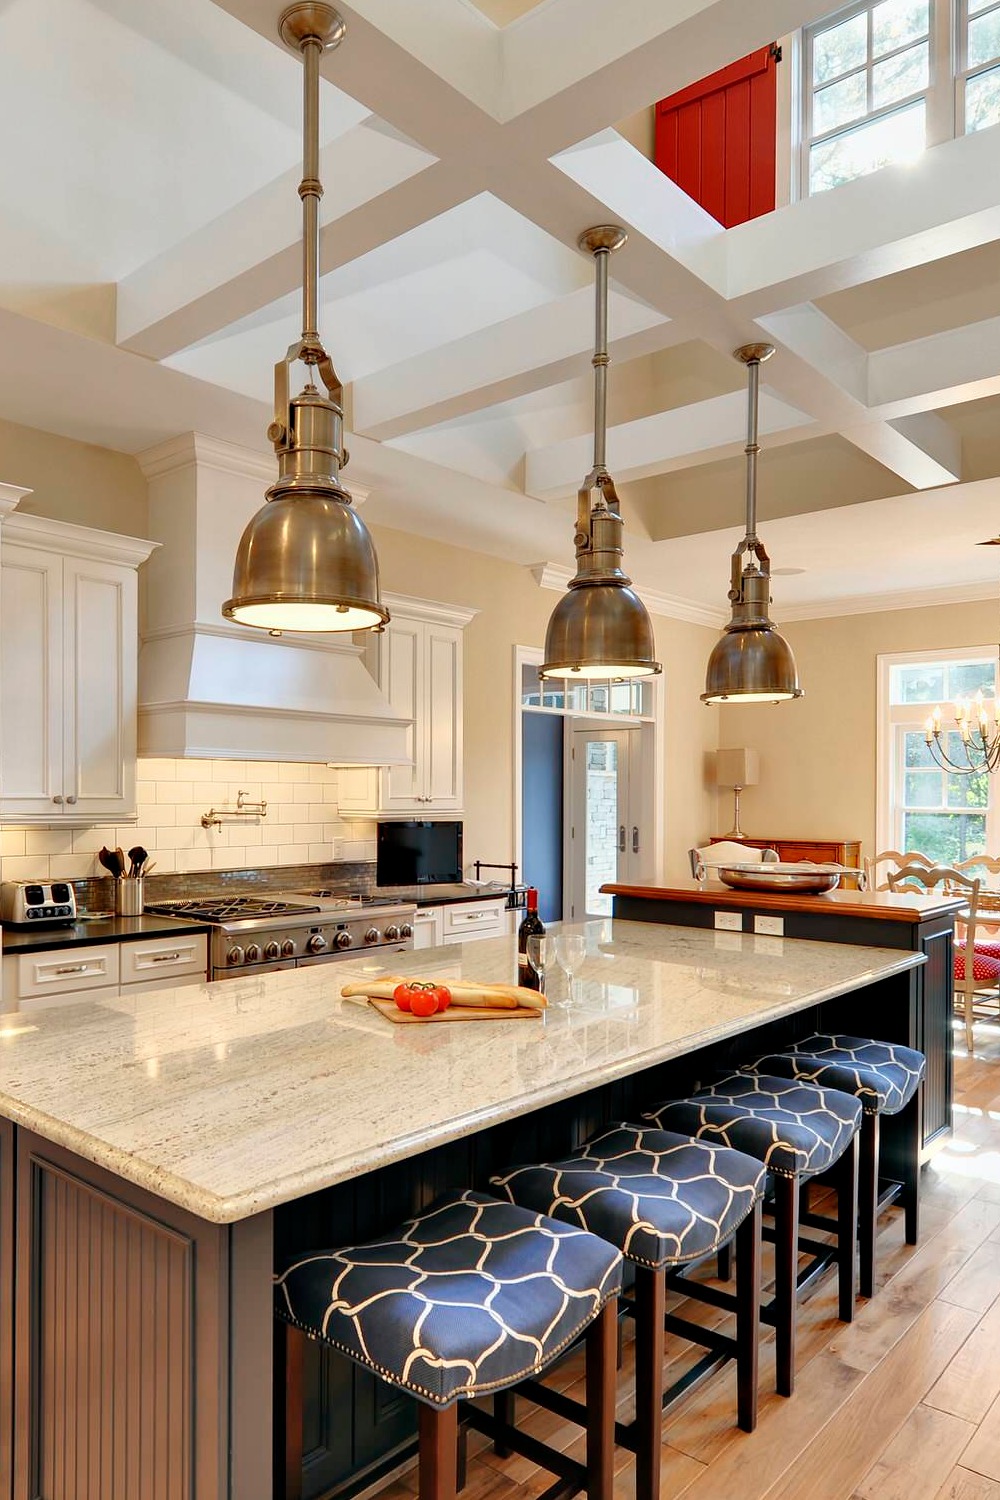 White Coffered Ceiling Ideas Dining Room Custom Coffers Subway Tiles Stunning Ceilings Granite Countertops